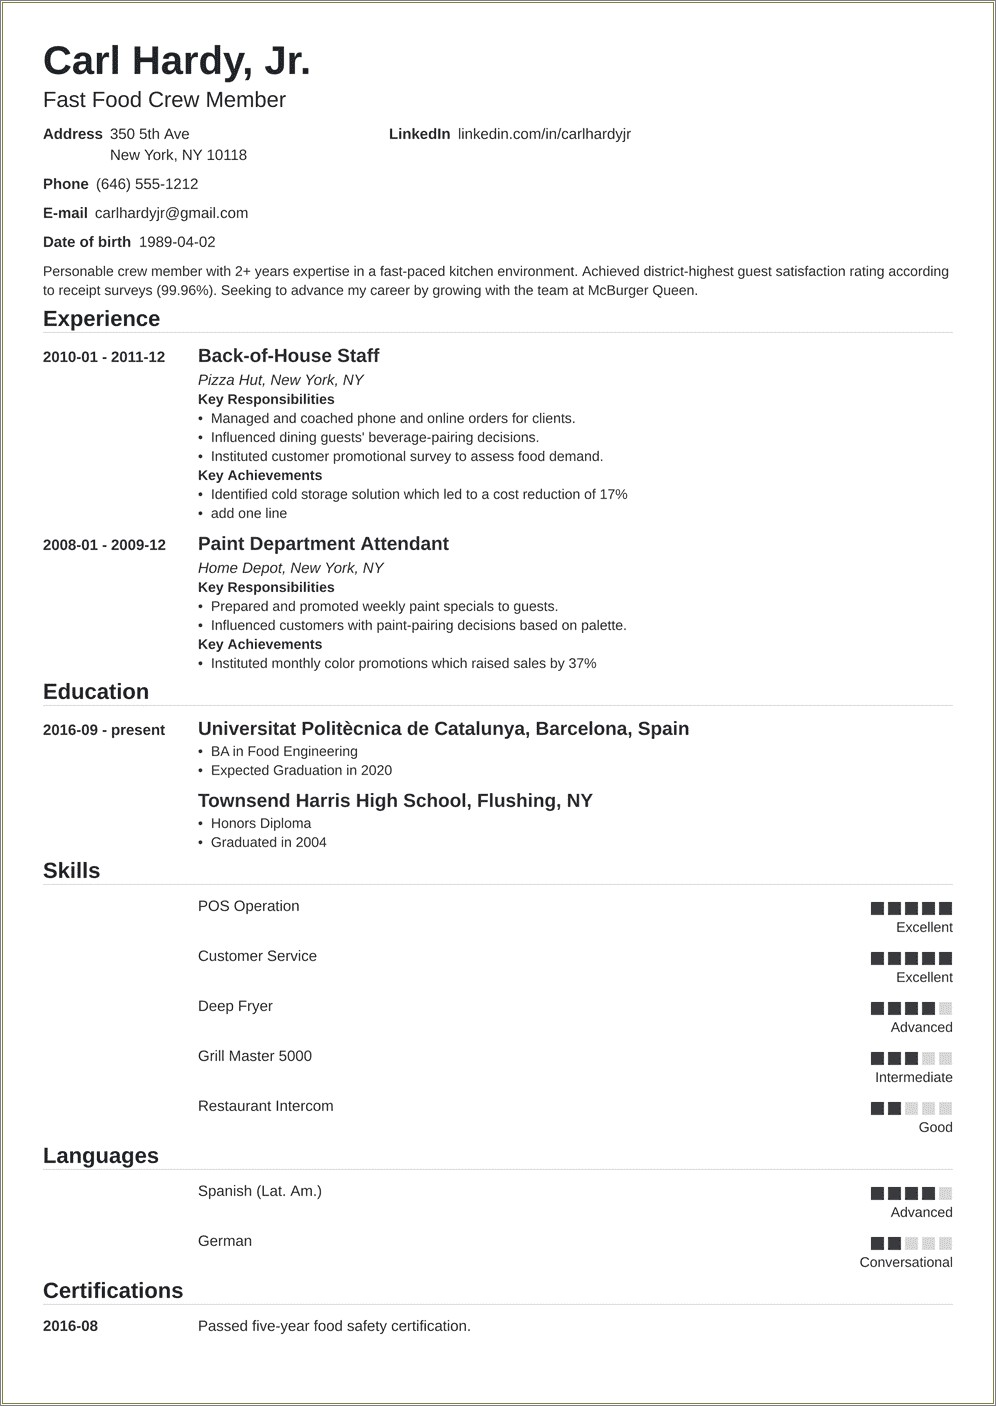 Sample Resumes For Fast Food Jobs